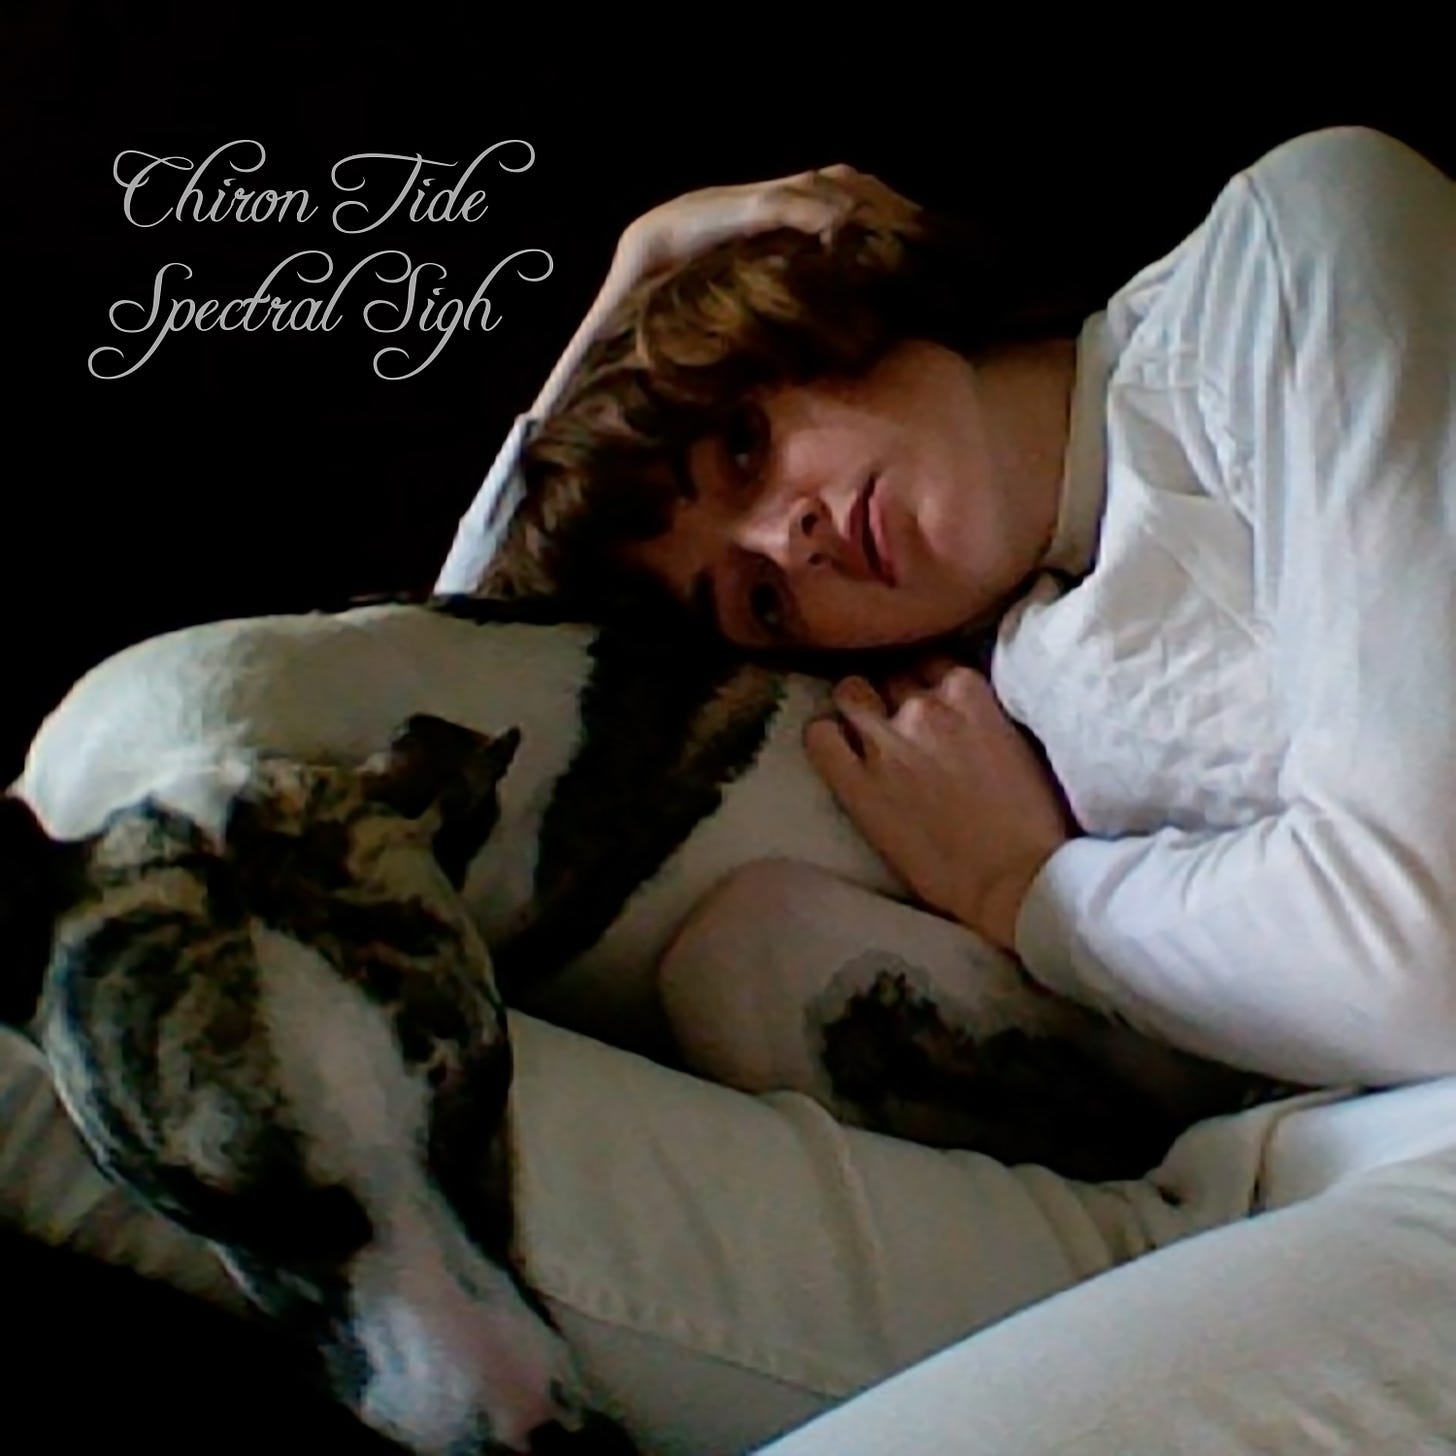 white cursive text reads "Chiron Tide Spectral Sigh" in the upper left corner above an image of a woman lying against a curled up white and brindle whippet. she holds her hair up and has a serious look on her face. she wears a white sweatshirt and white jeans.